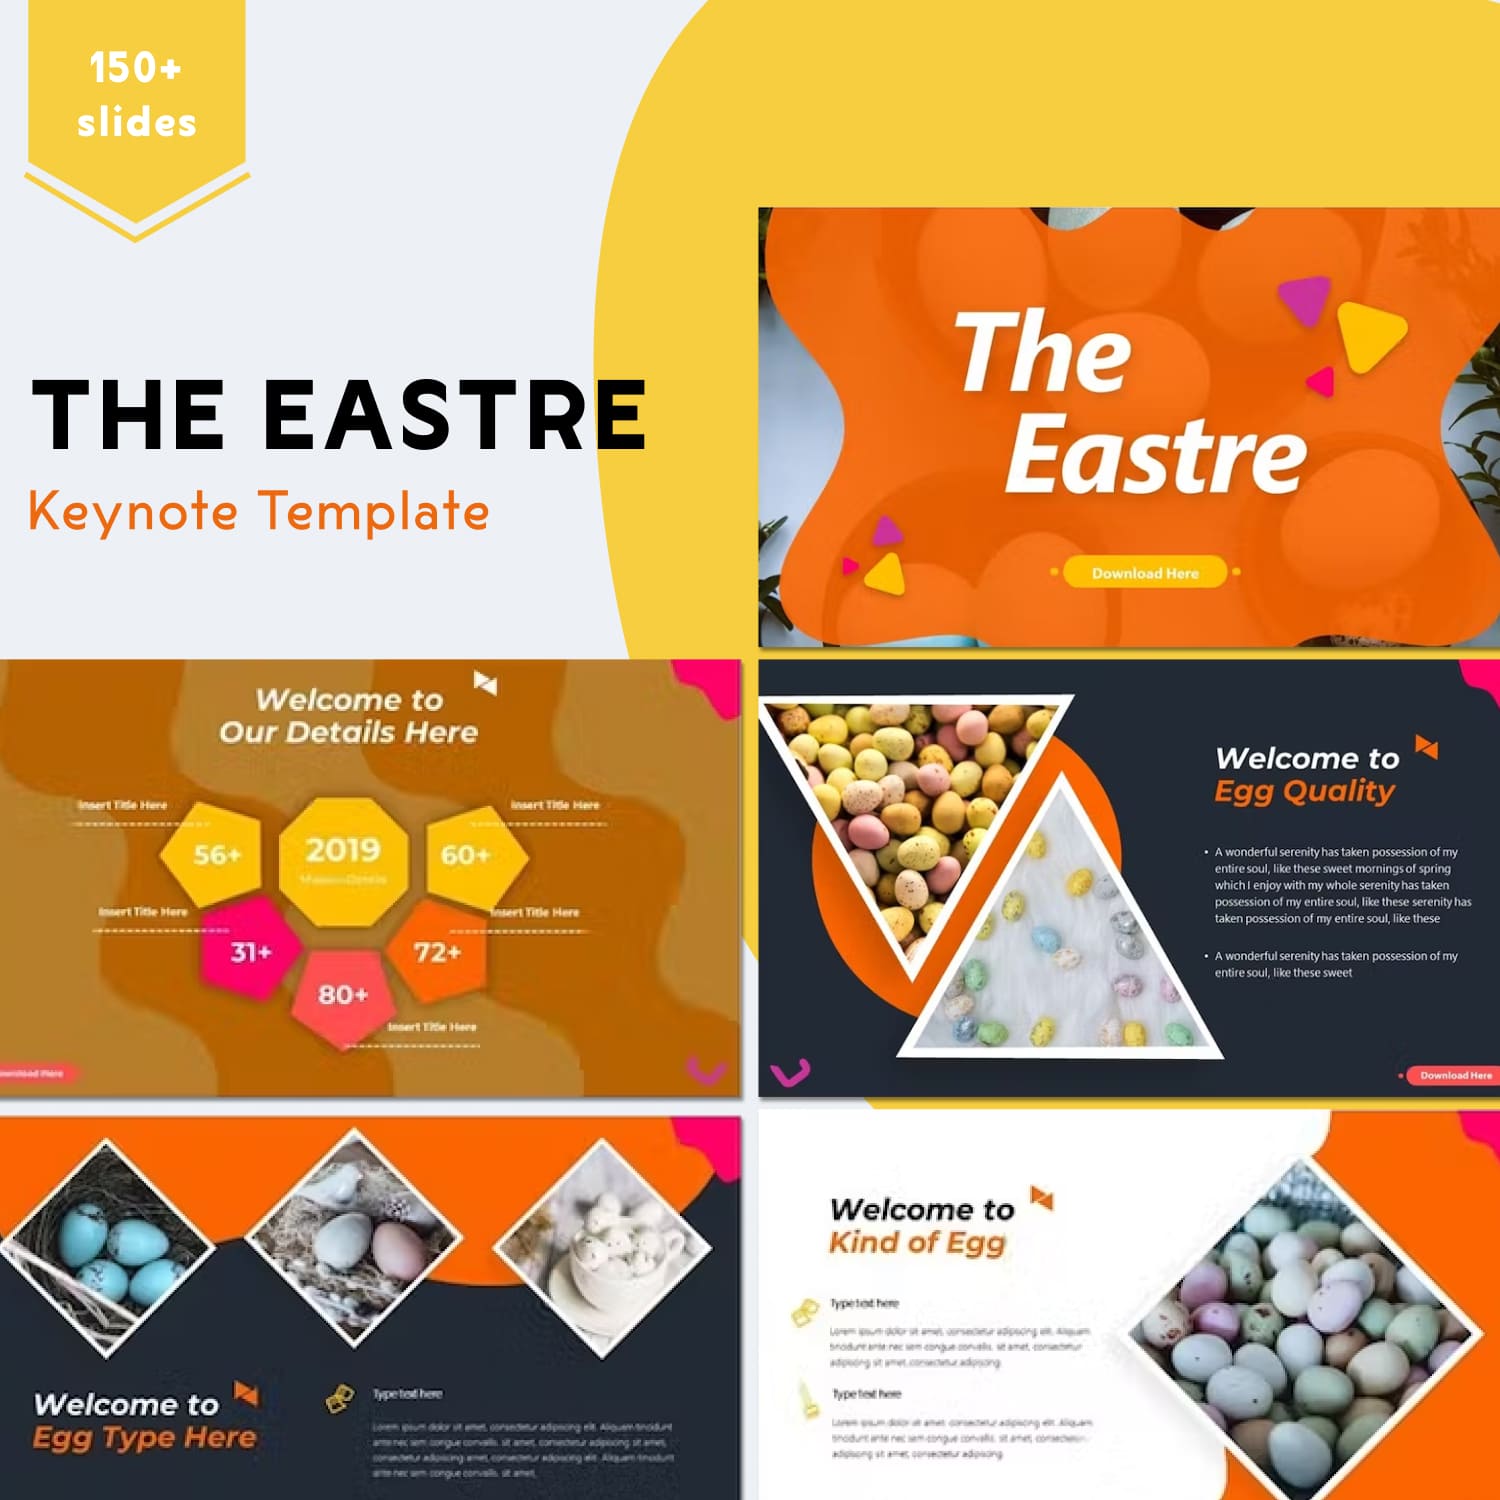 The Eastre | Keynote Template.